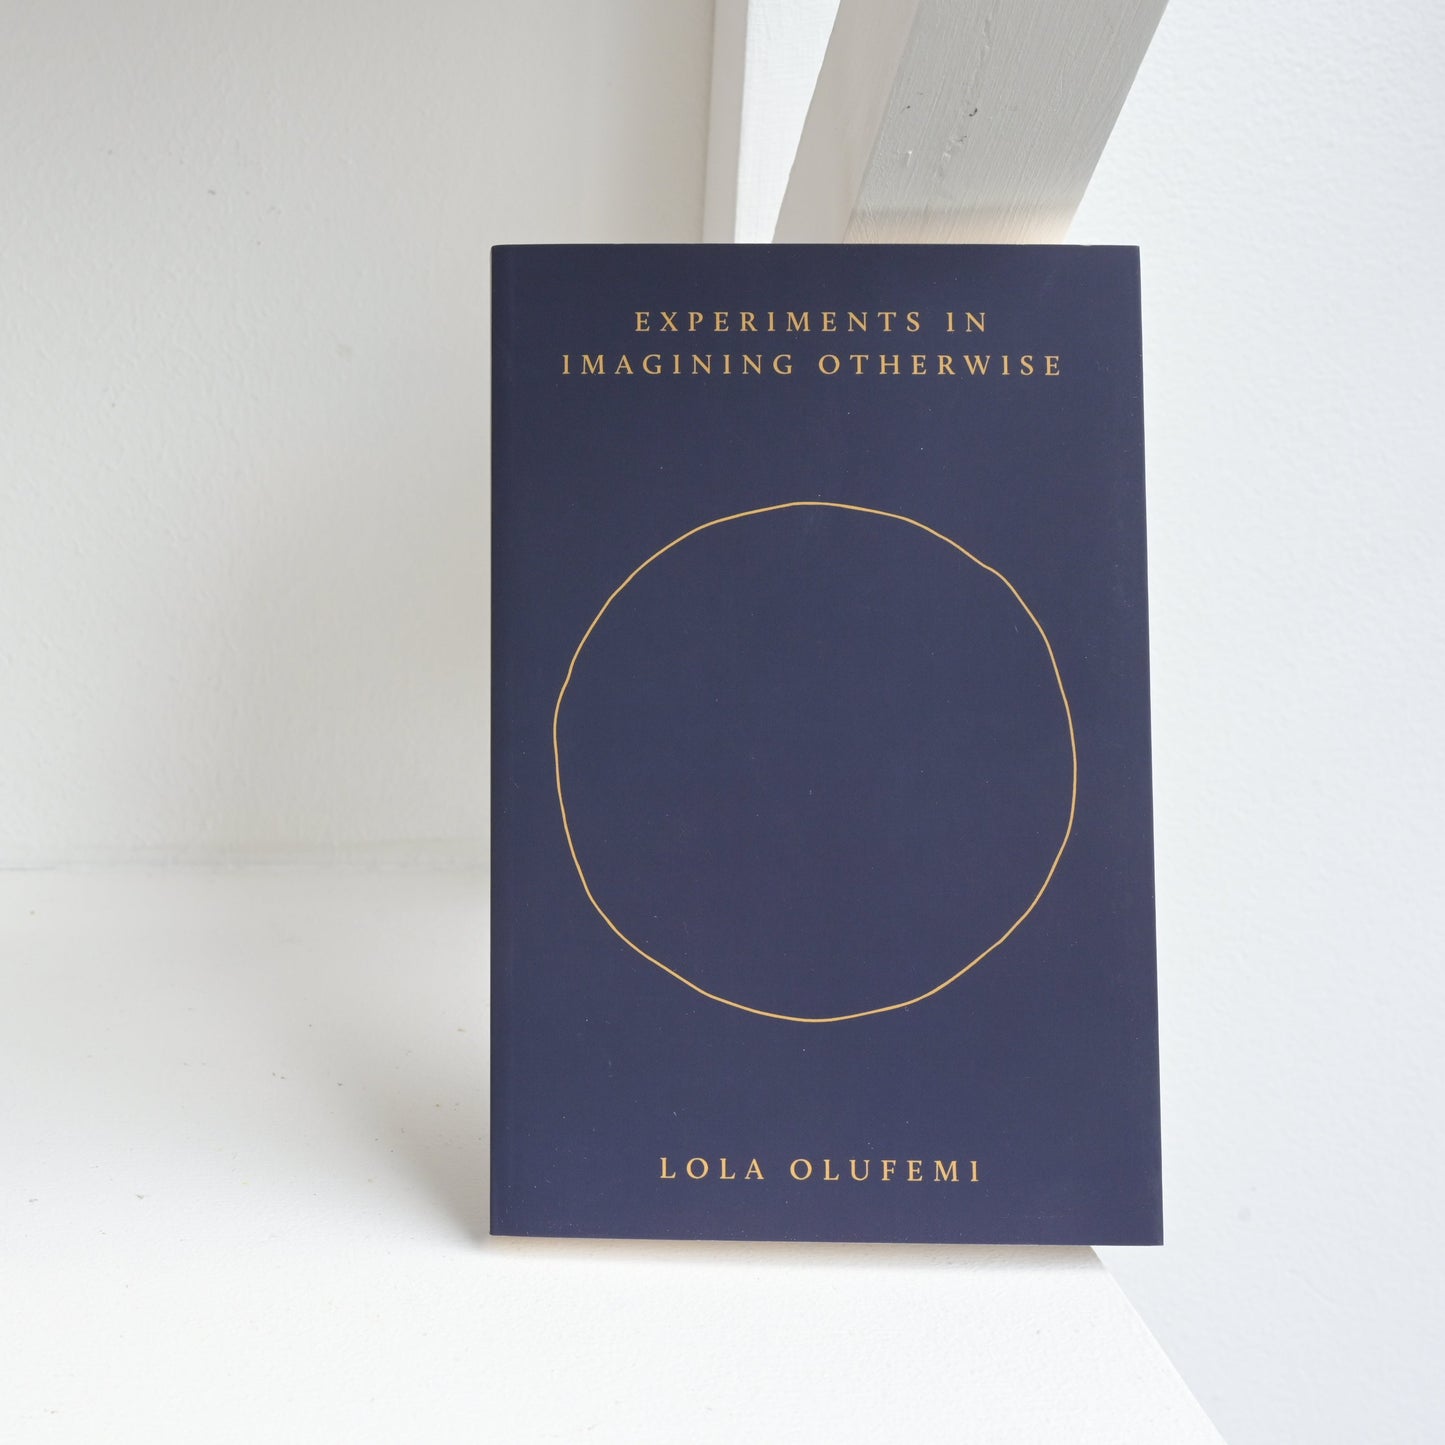 Lola Olufemi: Experiments in Imagining Otherwise